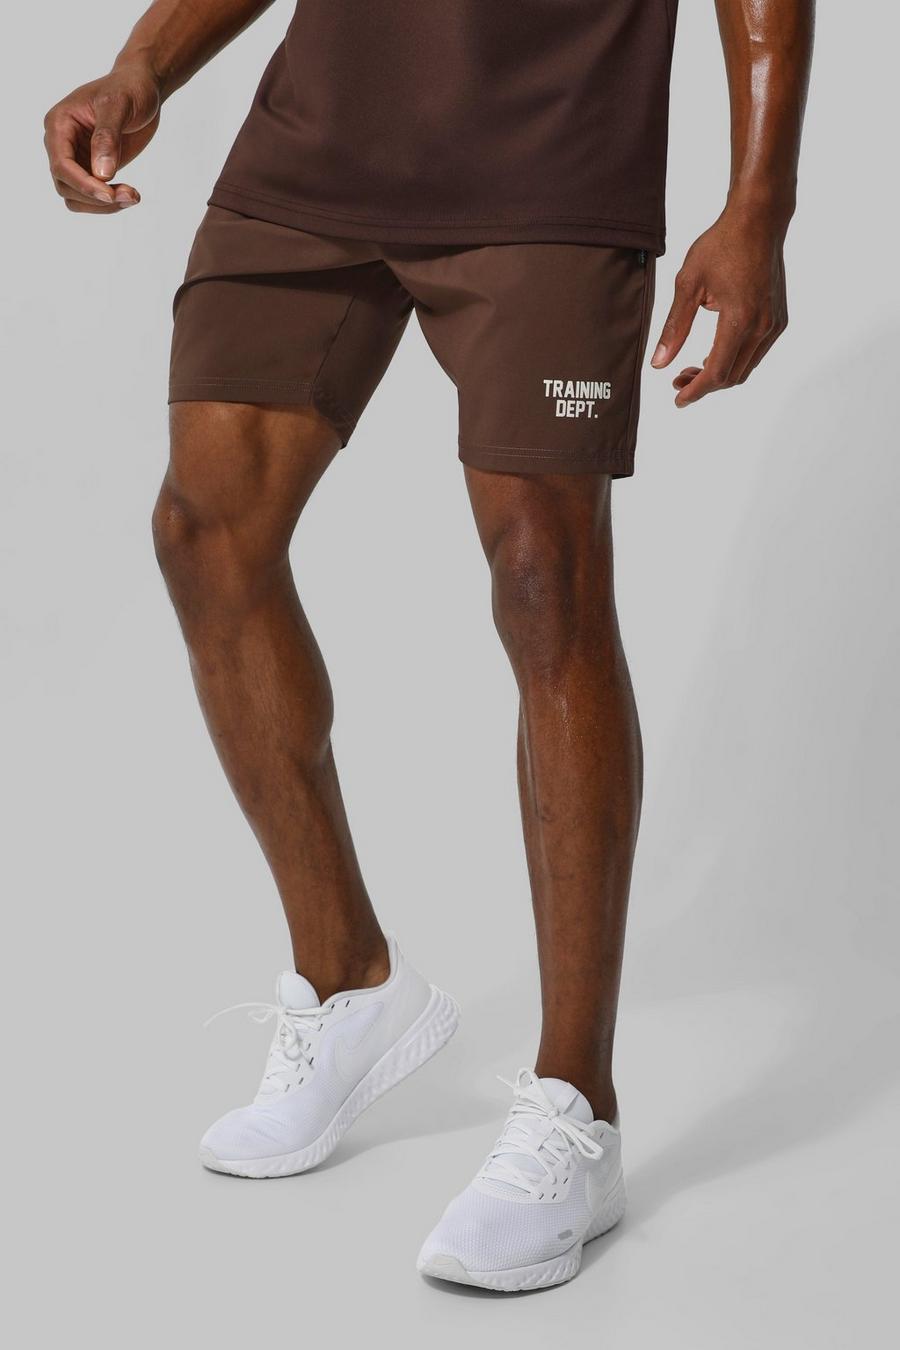 Tall Man Active Performance Trainings Dept Shorts, Chocolate brown